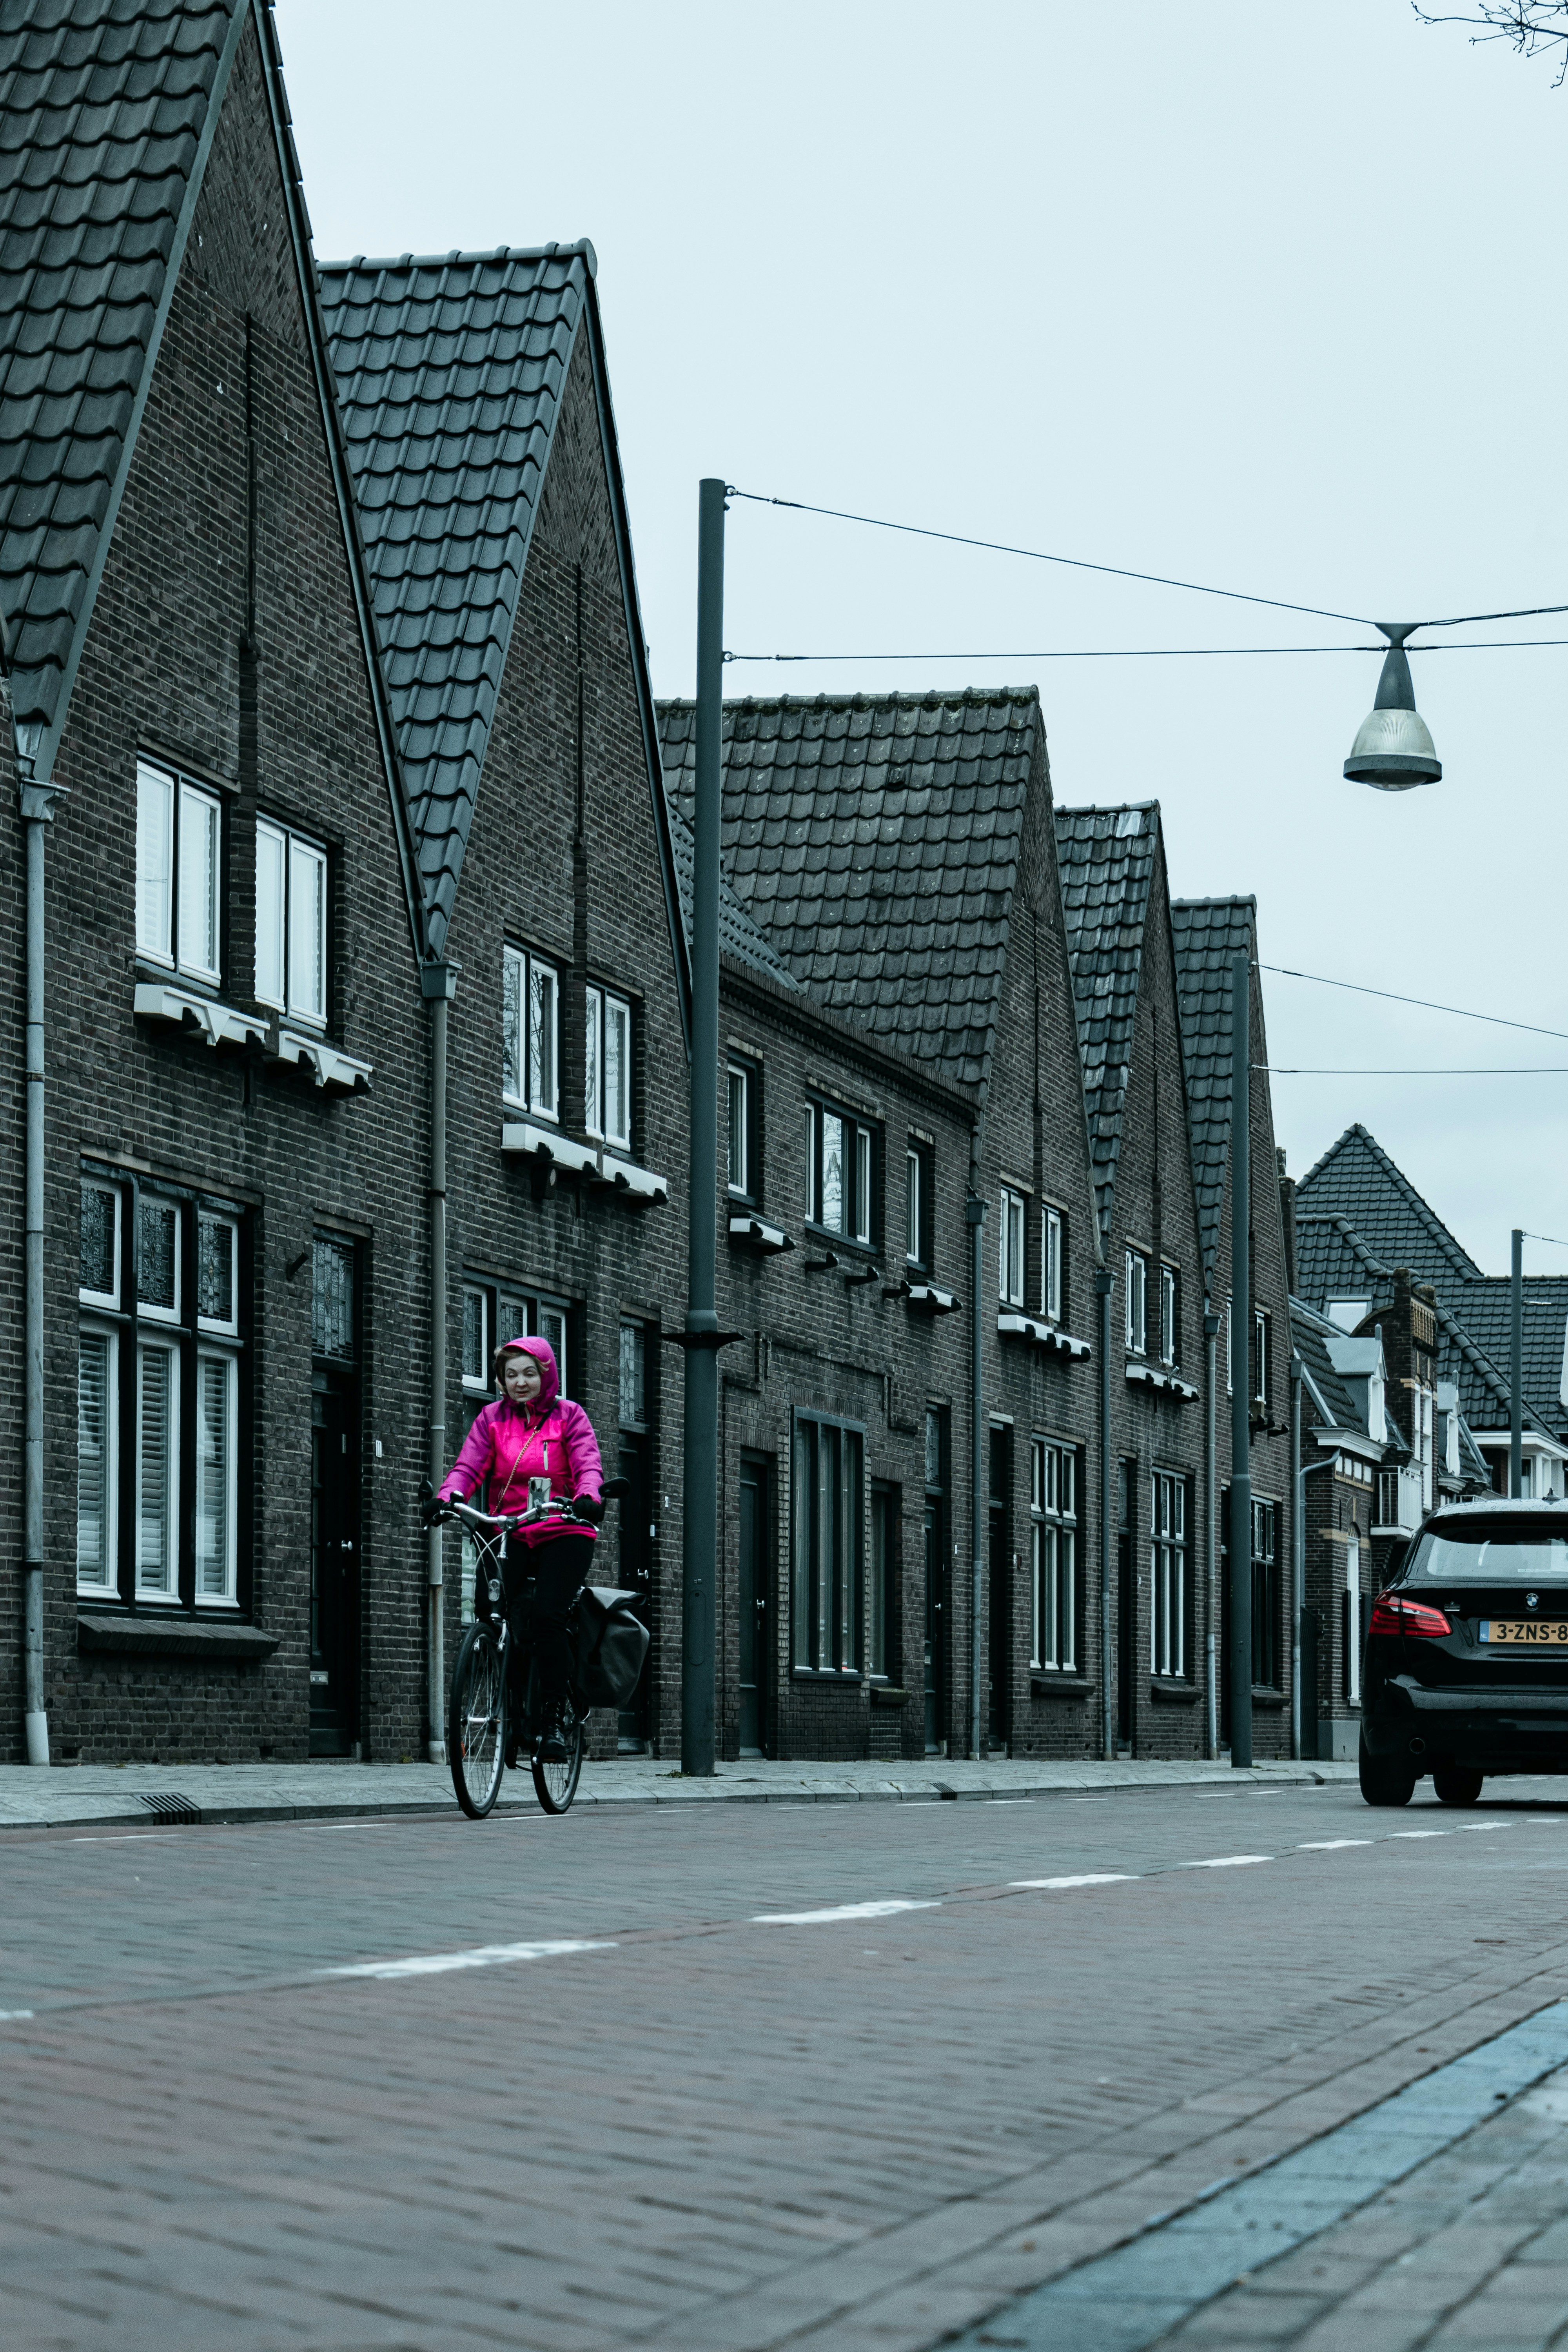 Woman in pink jacket cycling over street in Best, Eindhoven, Netherlands